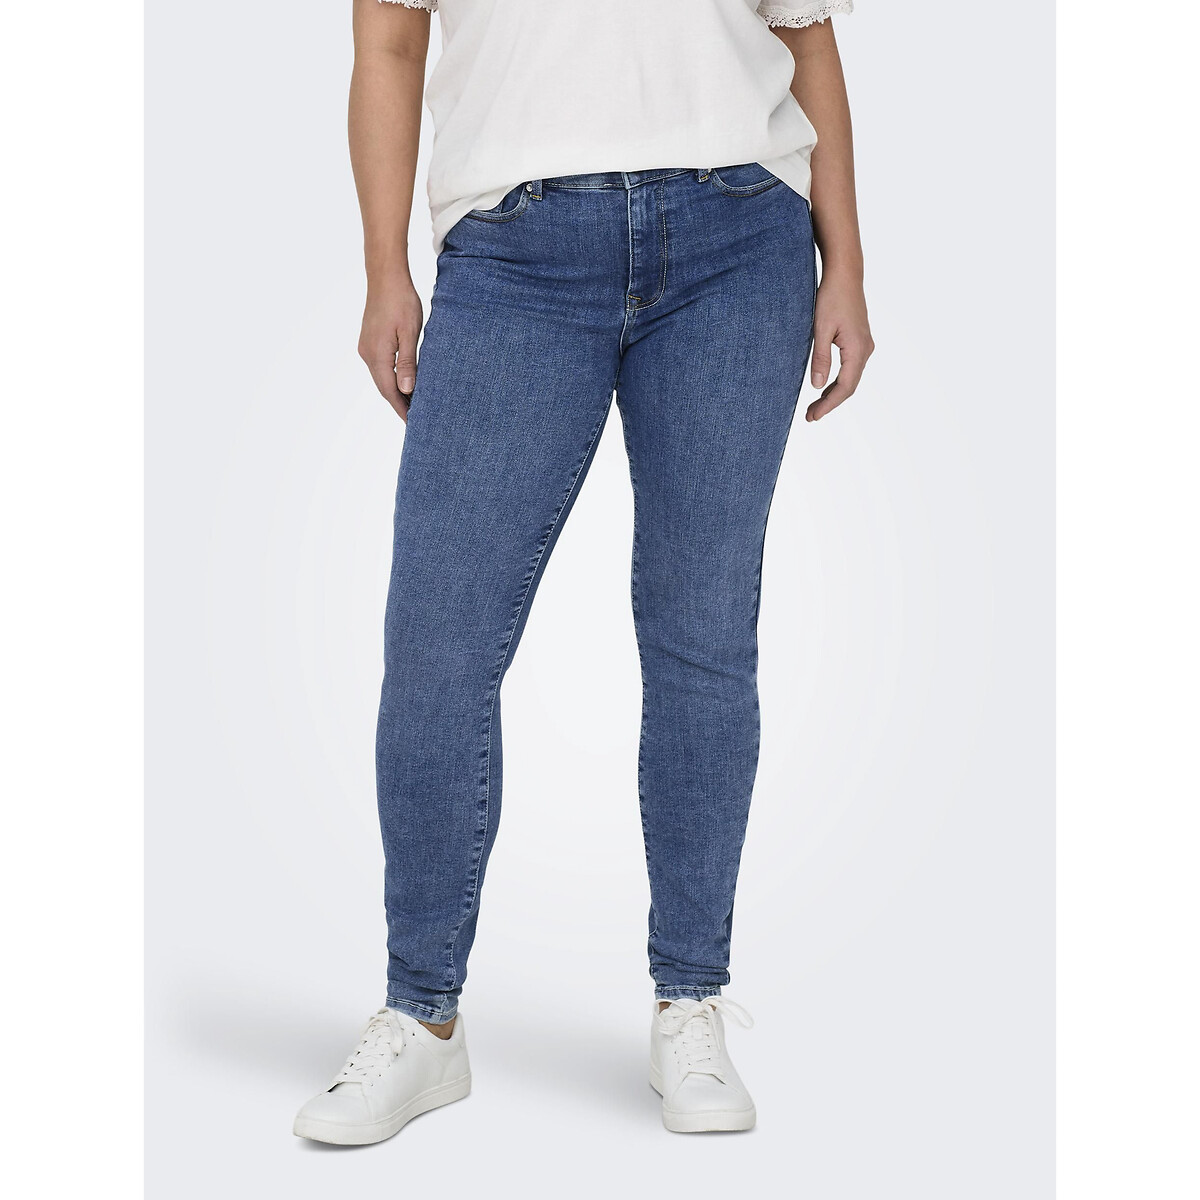 Jeans Skinny Pushup, standaard taille in de sale-ONLY Carmakoma 1